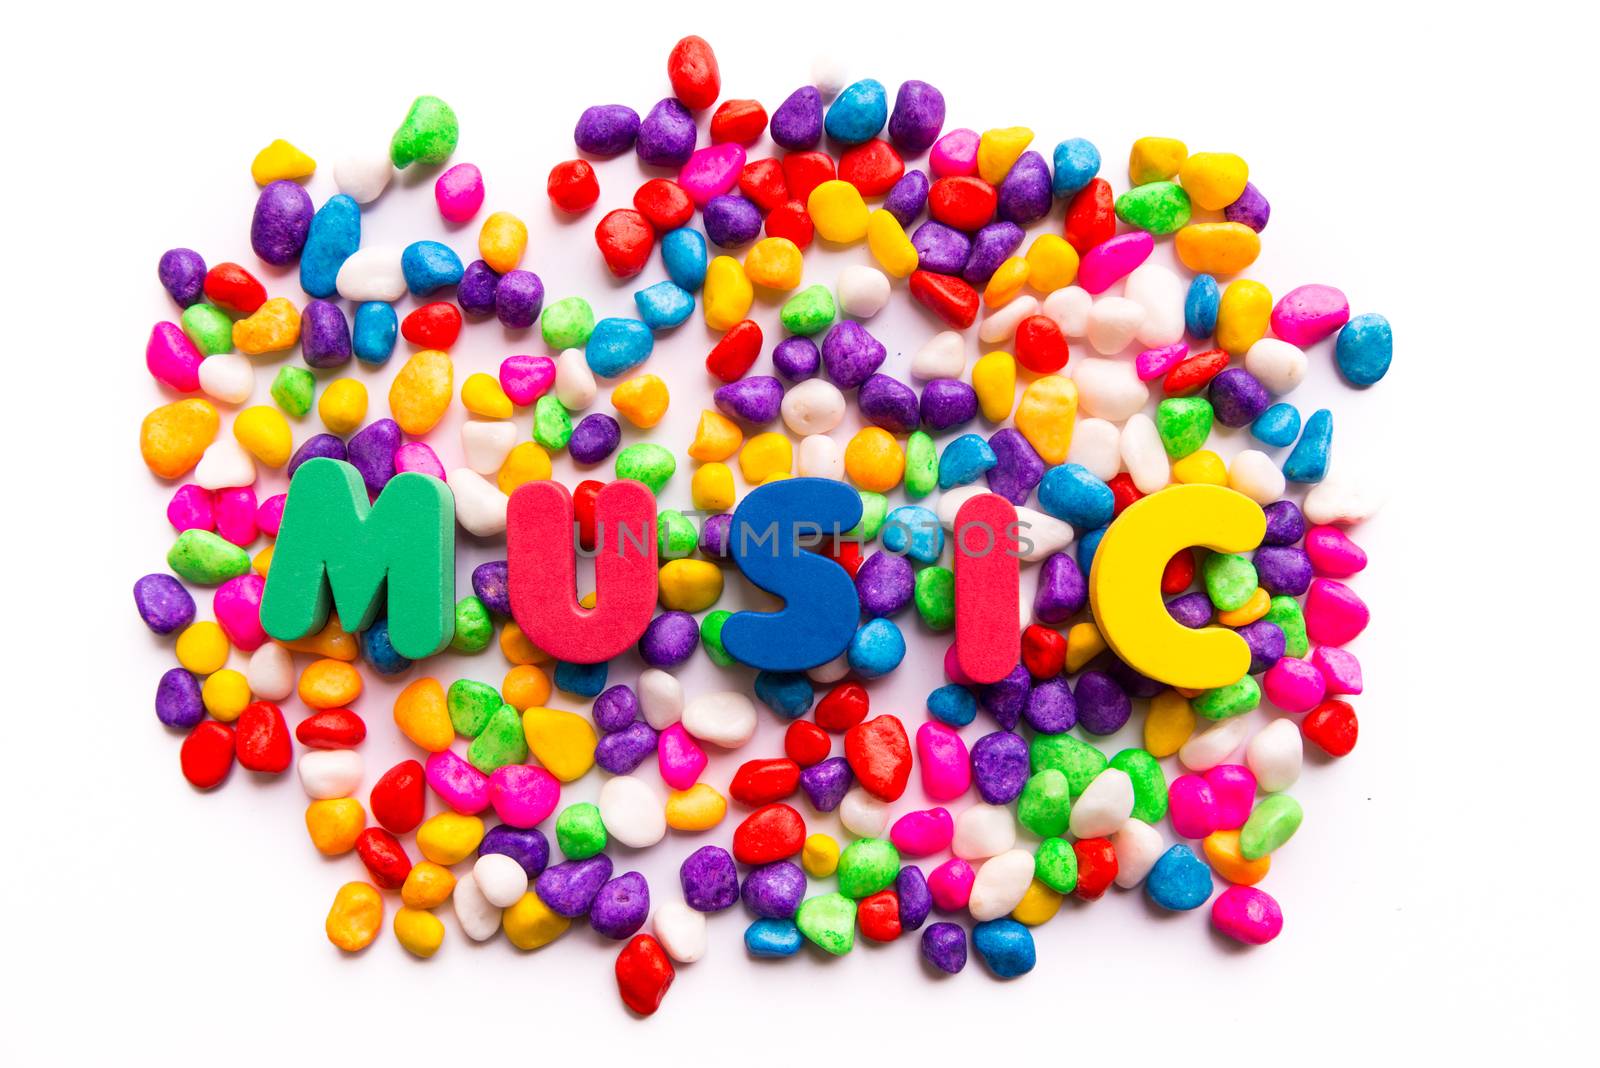 music words in colorful stones